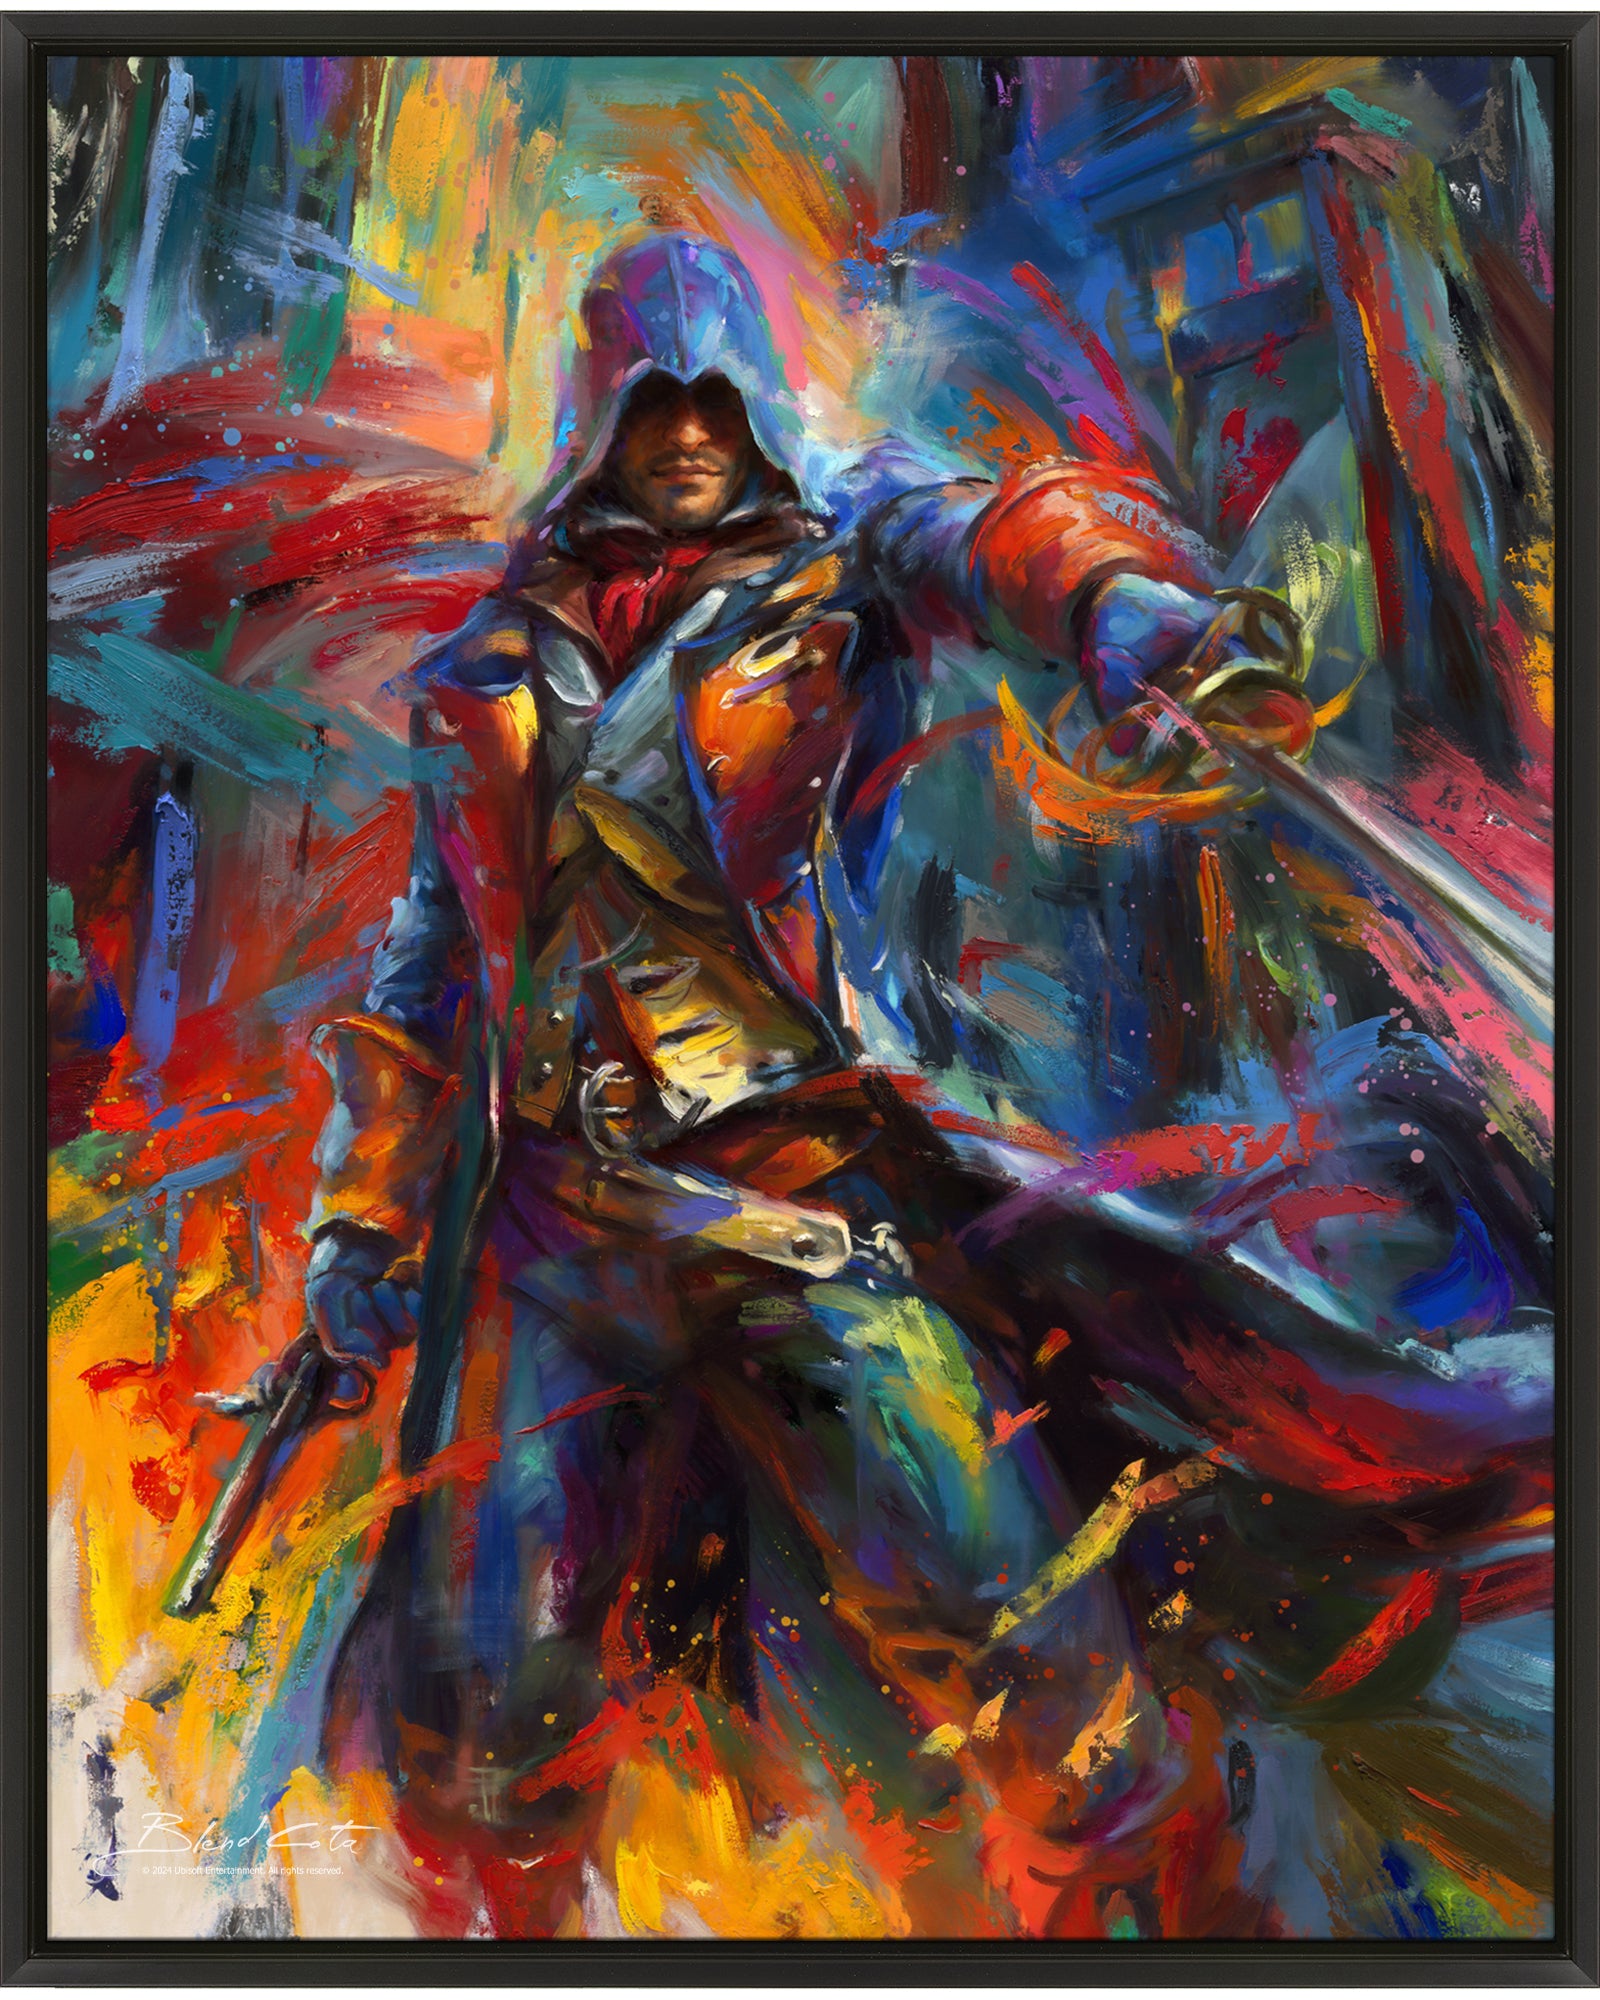 Hand embellished limited edition framed print on canvas of Ubisoft's Assassin's Creed Arno Dorian of Unity painted with colorful brushstrokes and energy in motion.